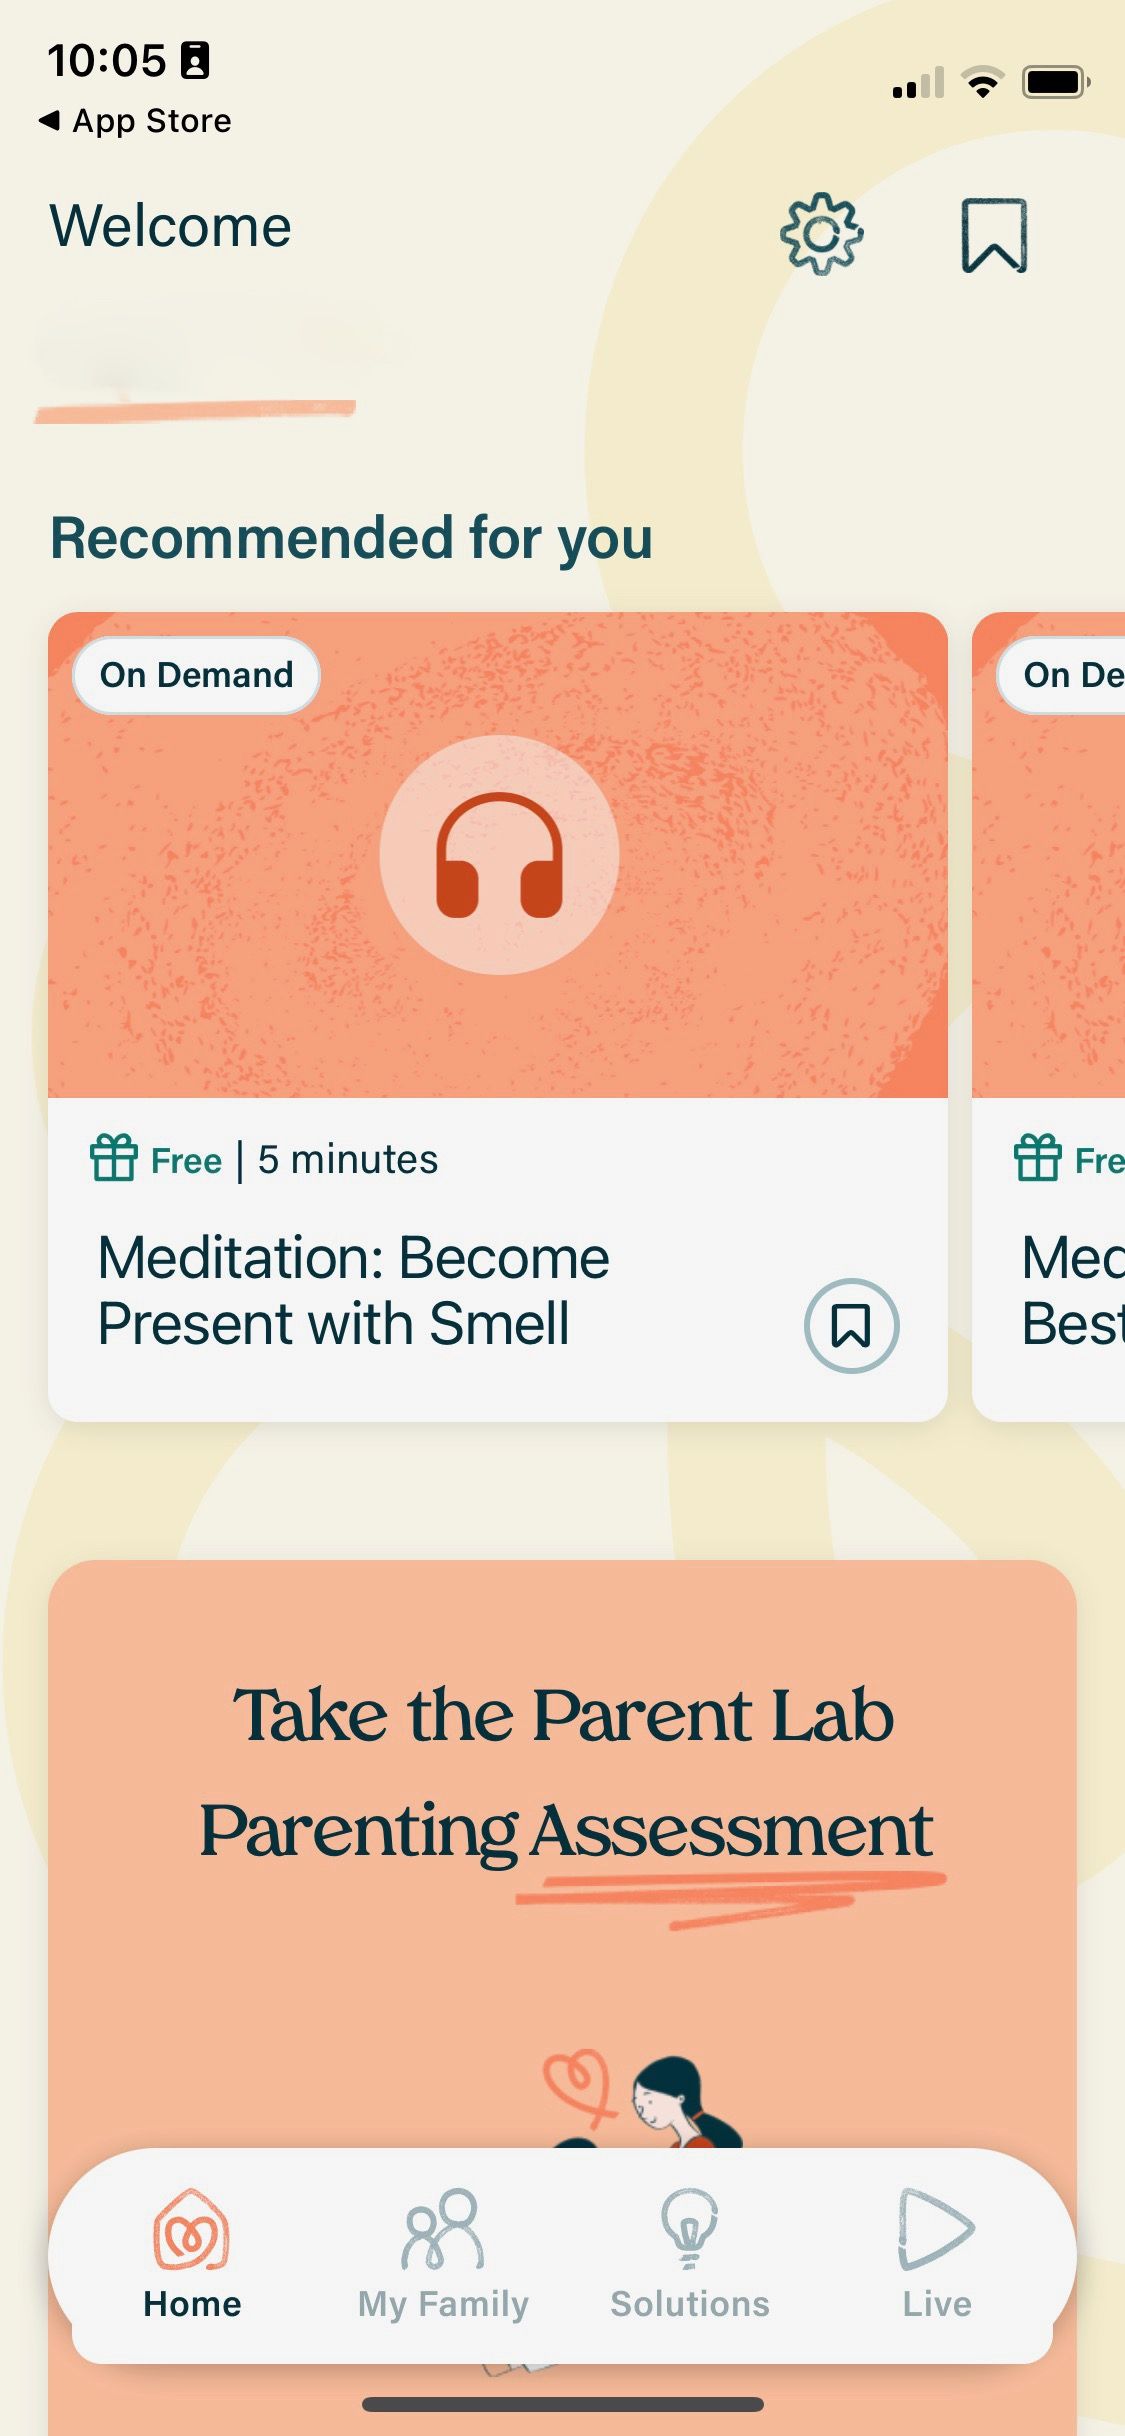 Screenshot of Parent Lab app showing Welcome screen